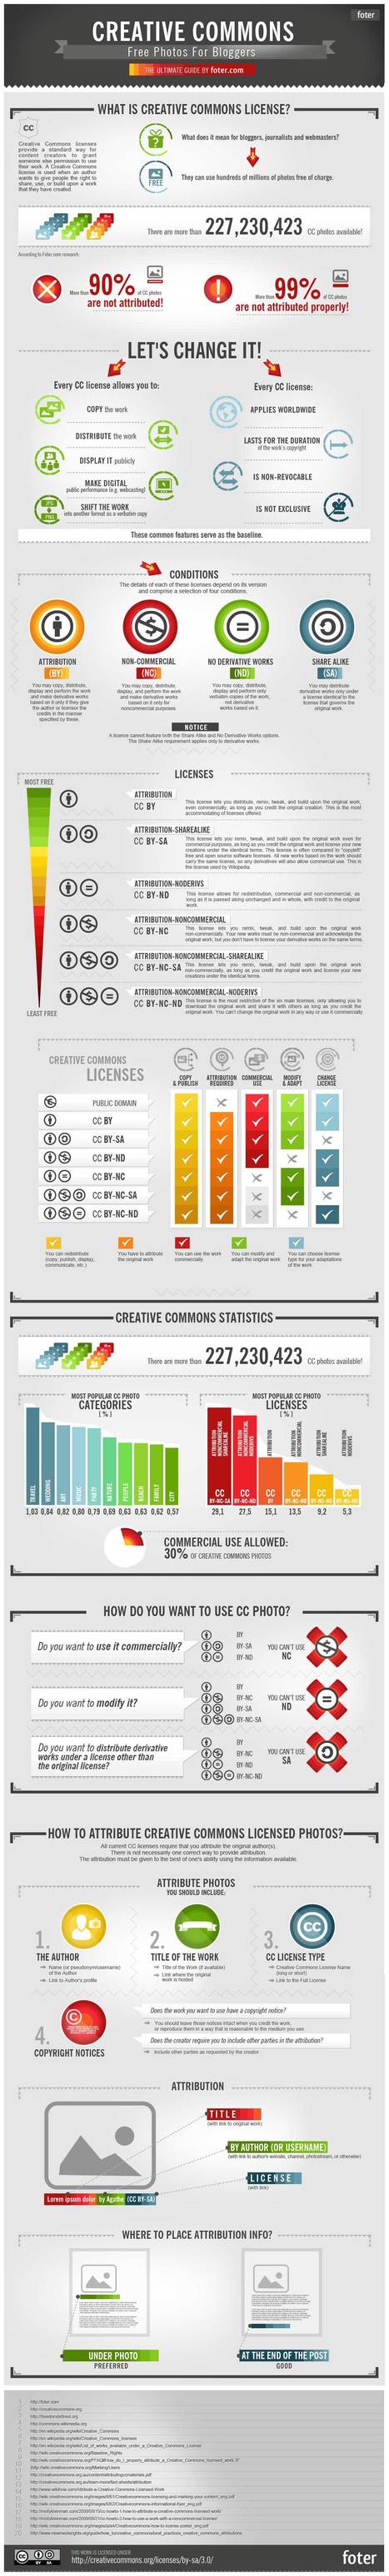 CreativeCommons-Infographic | Visual Design and Presentation in Education | Scoop.it